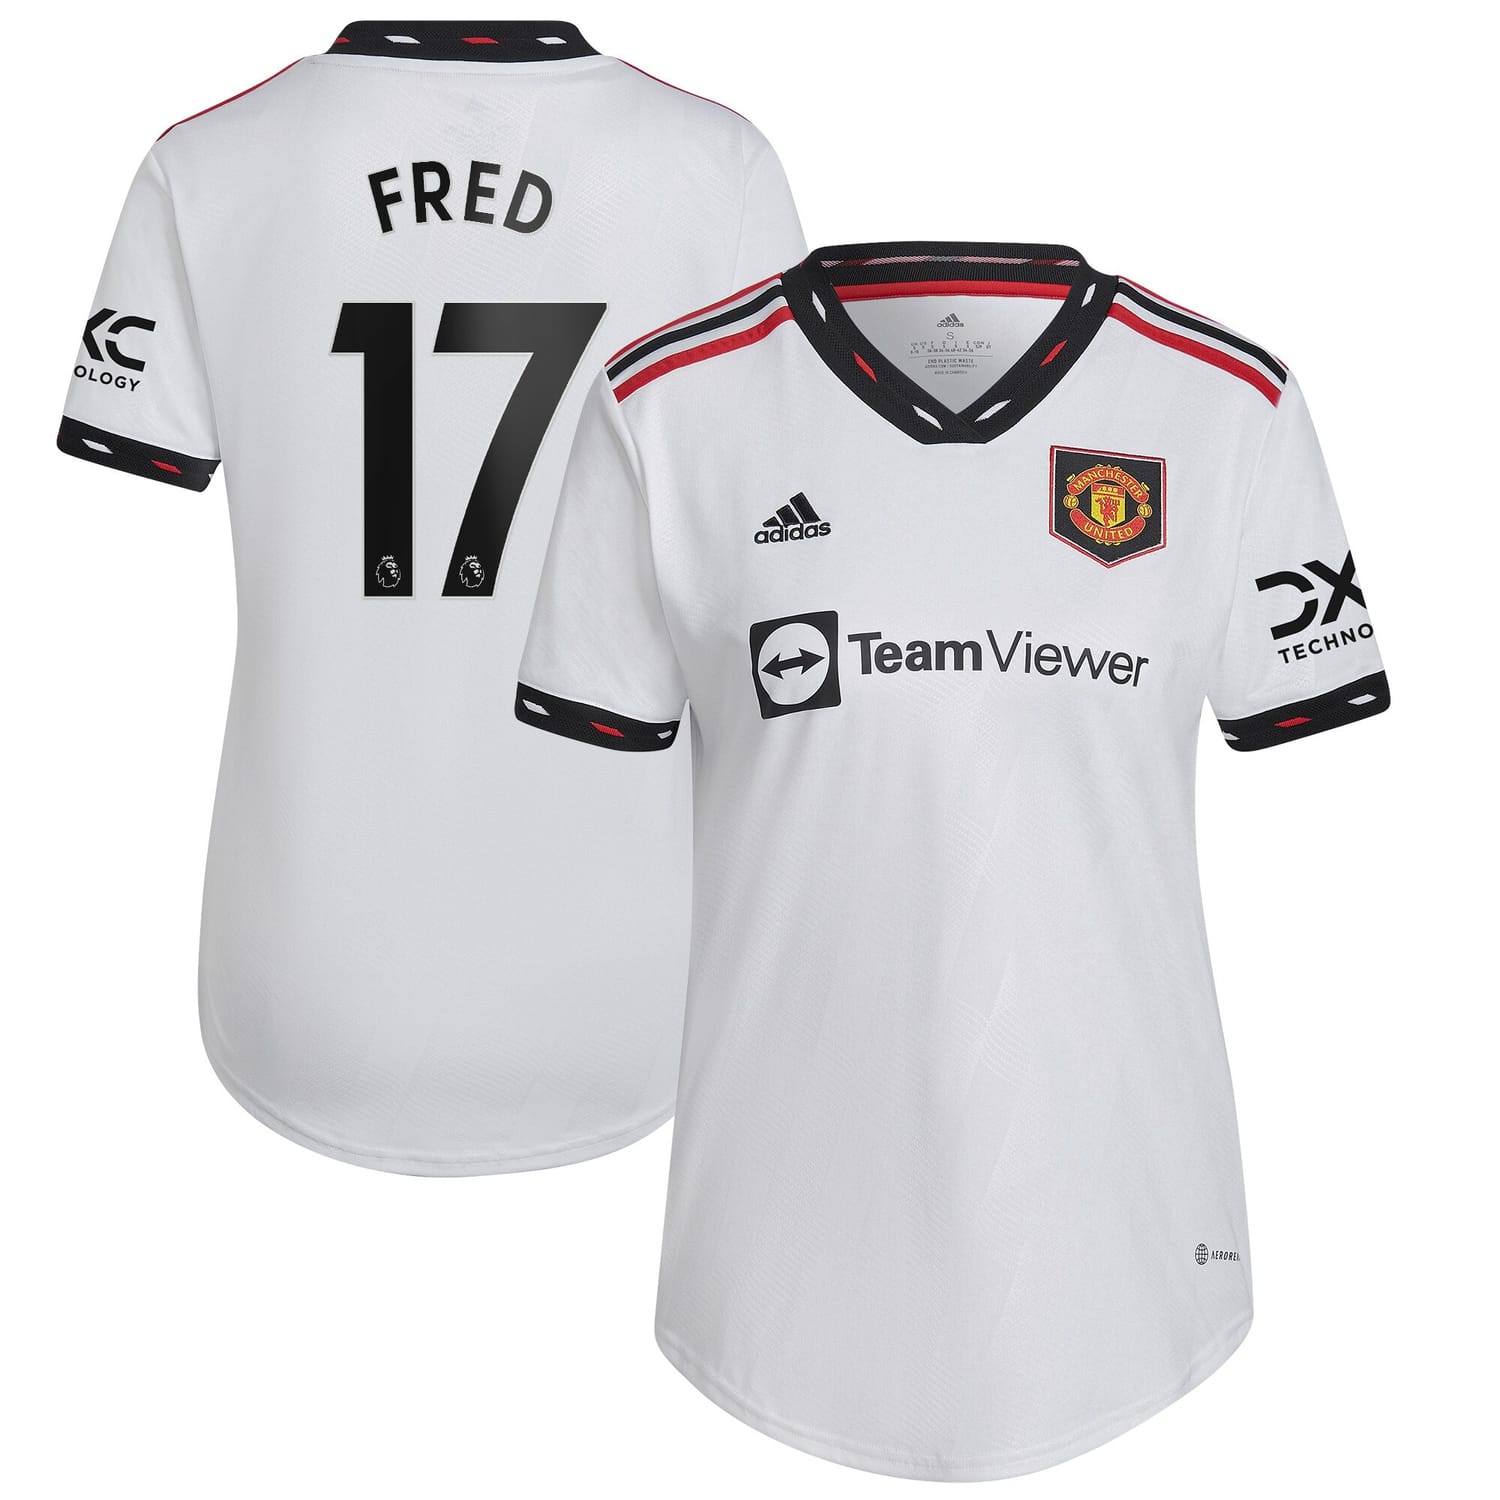 Premier League Manchester United Away Jersey Shirt White 2022-23 player Fred printing for Women